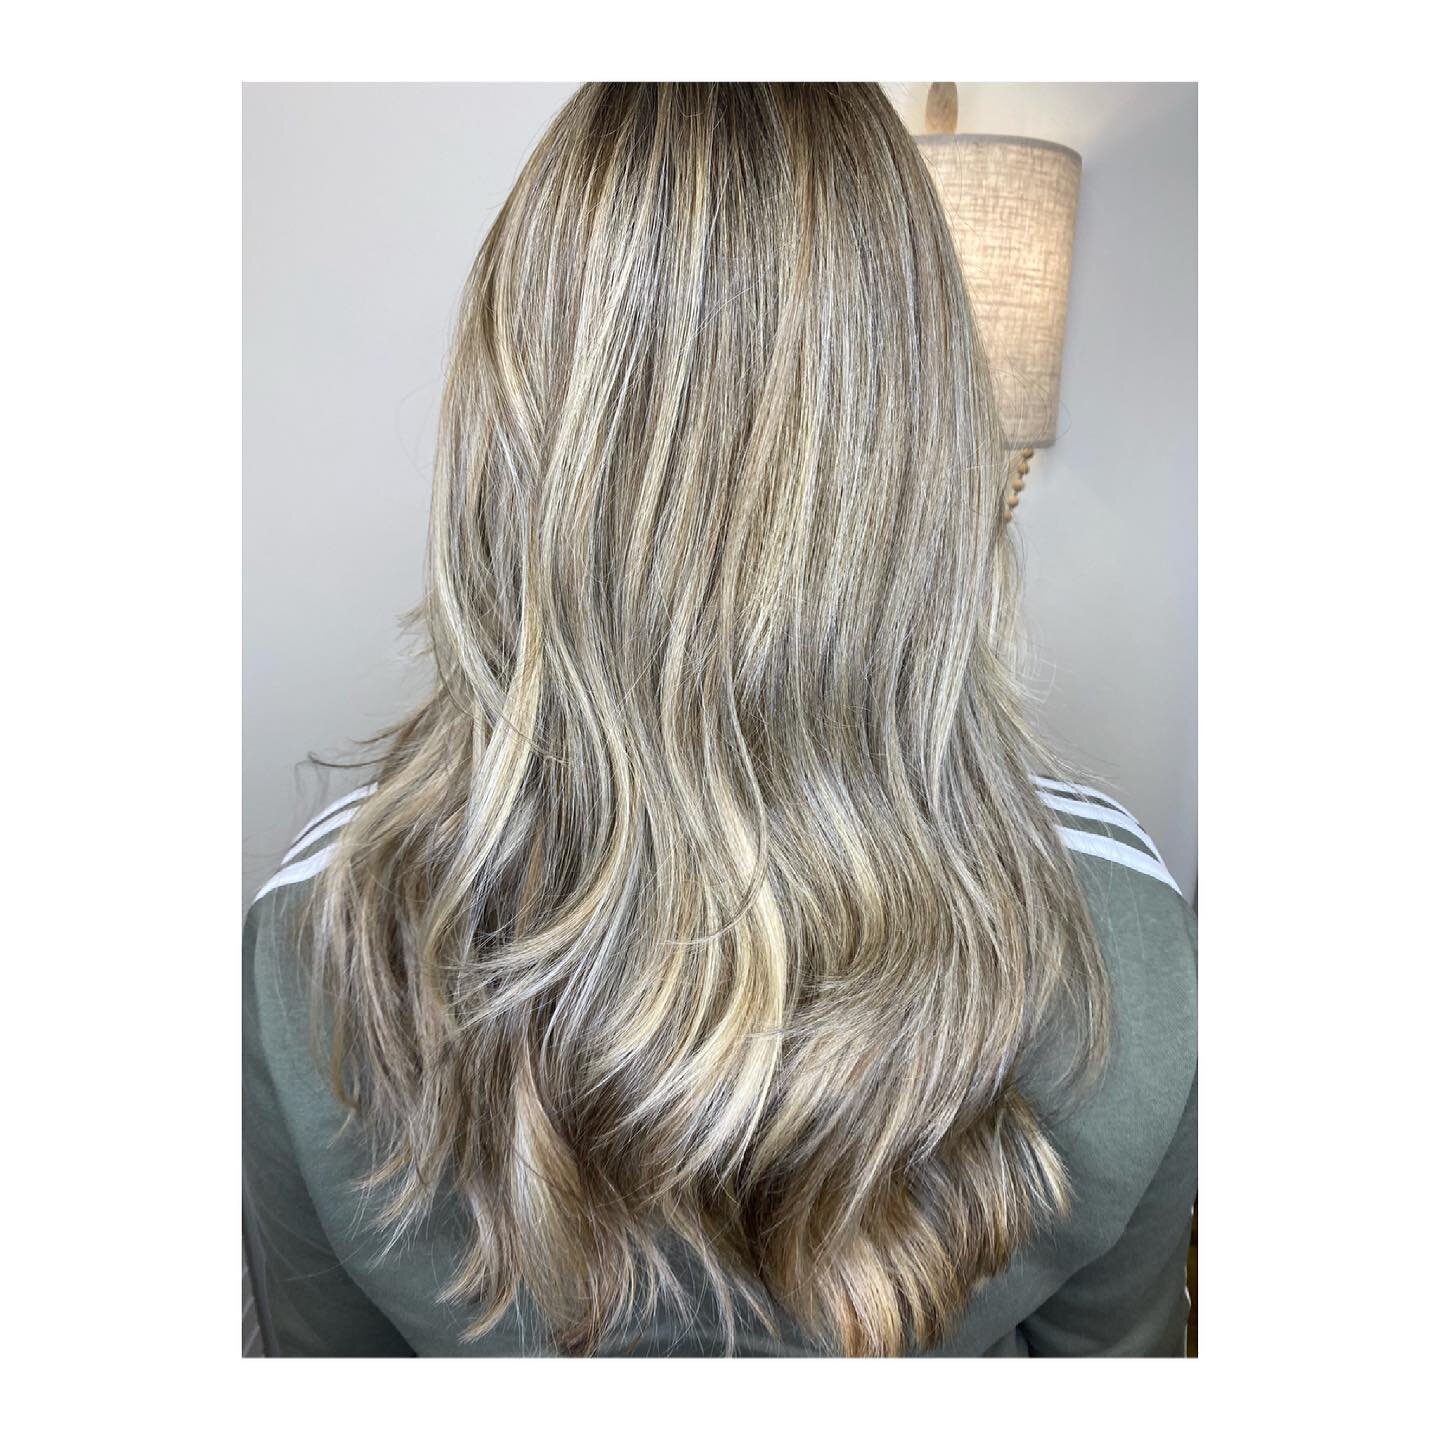 Icy highlights and cut 🧊✂️ By Gina #beinspiredLB